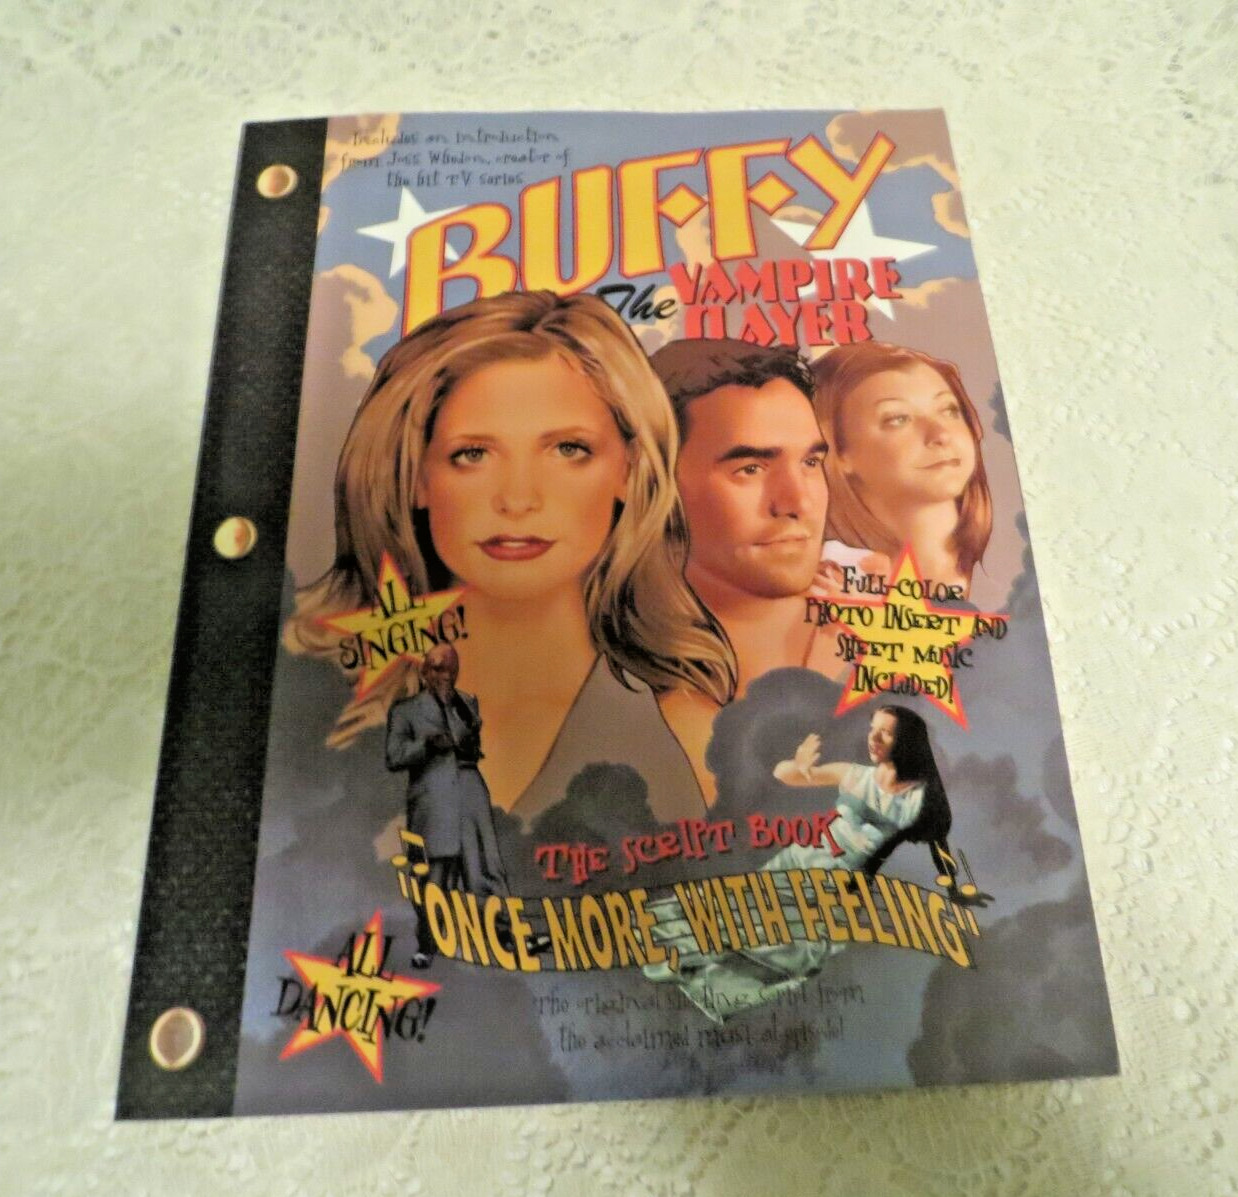 2002 Buffy The Vampire Slayer The Script Book Once More With Feeling w/insert